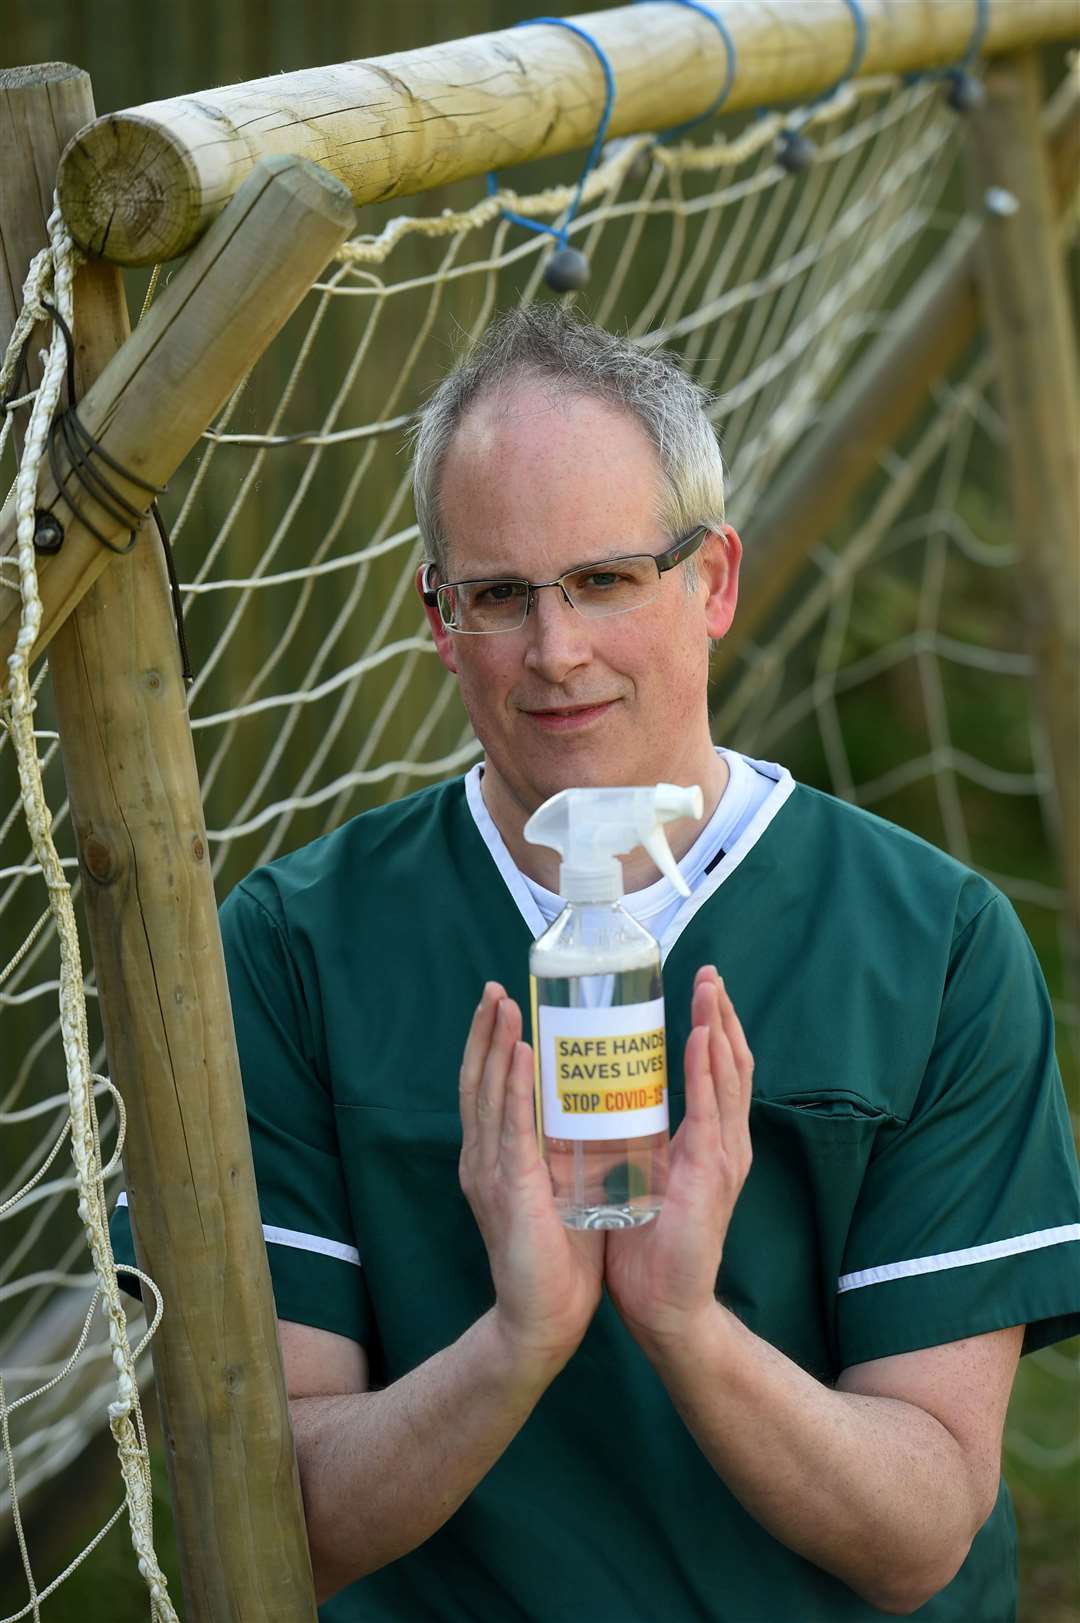 General practitioner Ross Jaffrey at the Safe Hands Saves Lives campaign launch in 2020. Photo: Callum Mackay